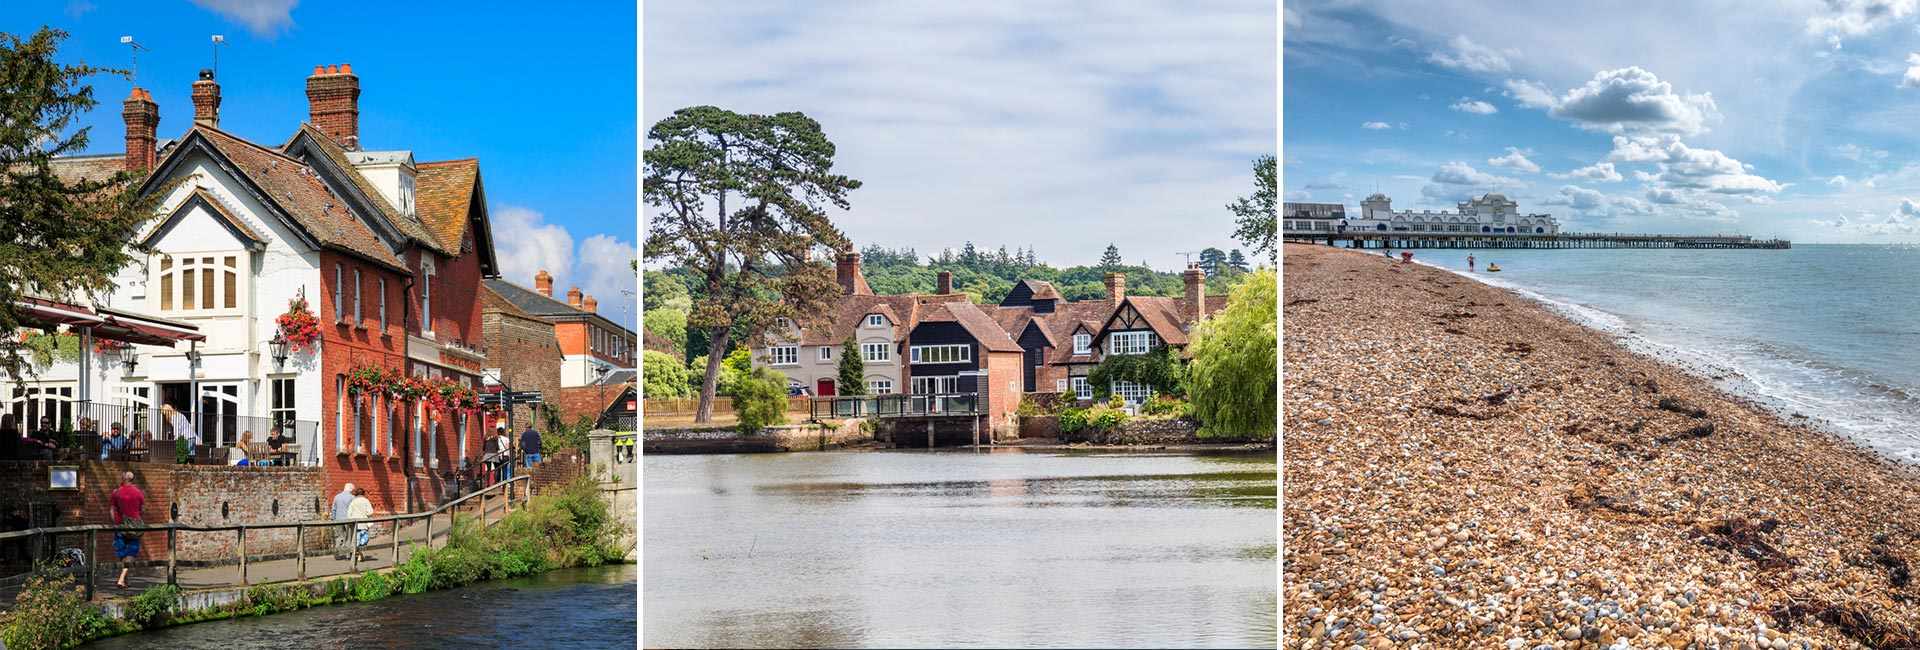 Things to do in Hampshire | Berkeley Inspiration